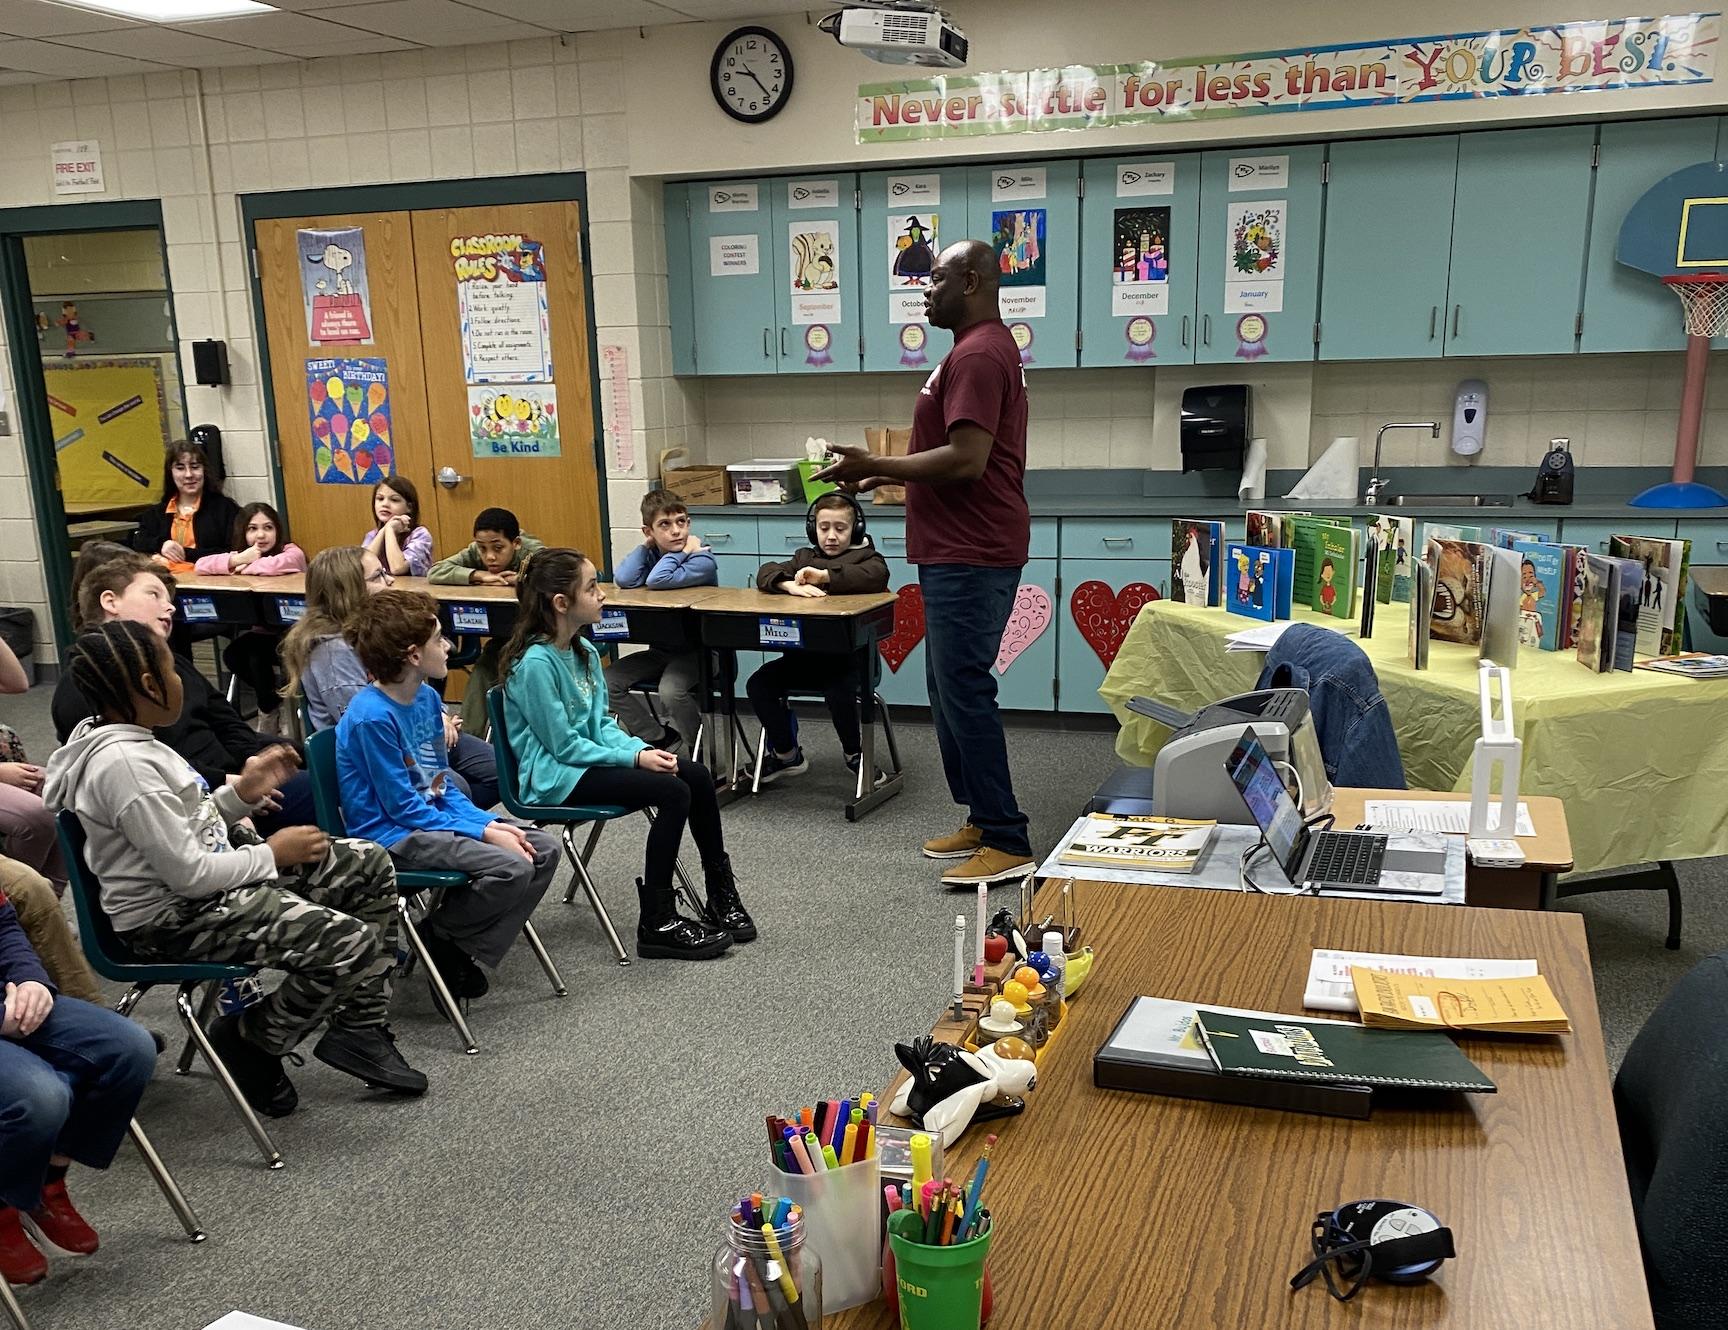 Mr. Stokes speaks to Trafford Elementary students